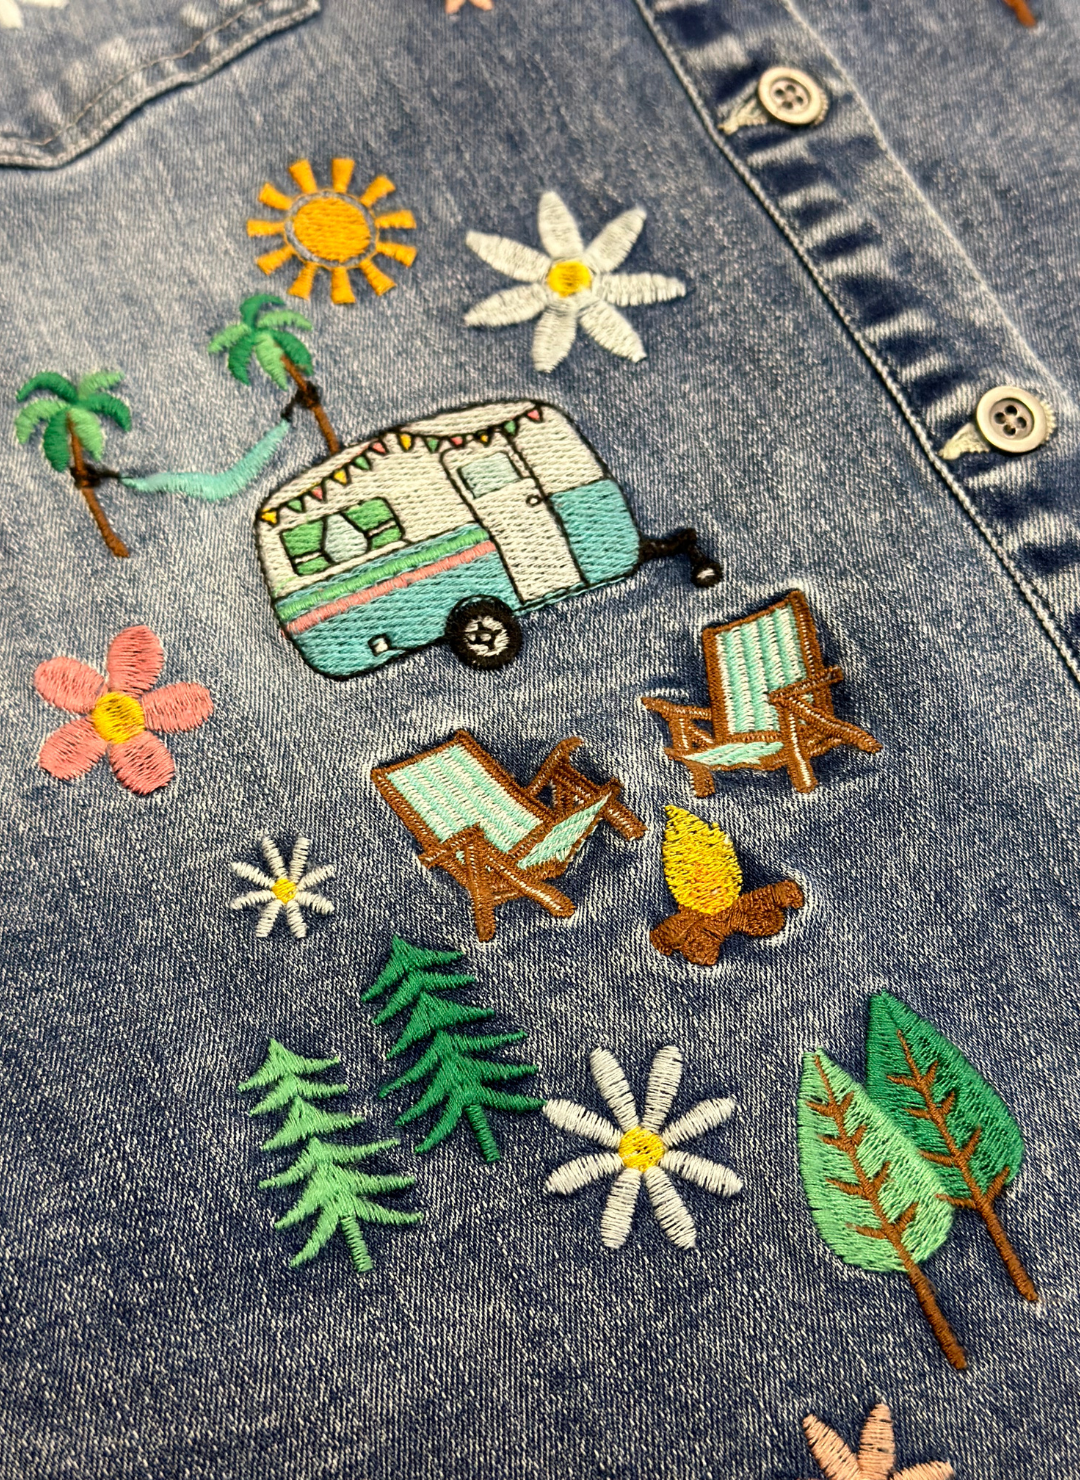 Close up flat view of denim camper shirt with embroidered, trailer, sun, hammock, campfire, chairs, trees, and flowers.